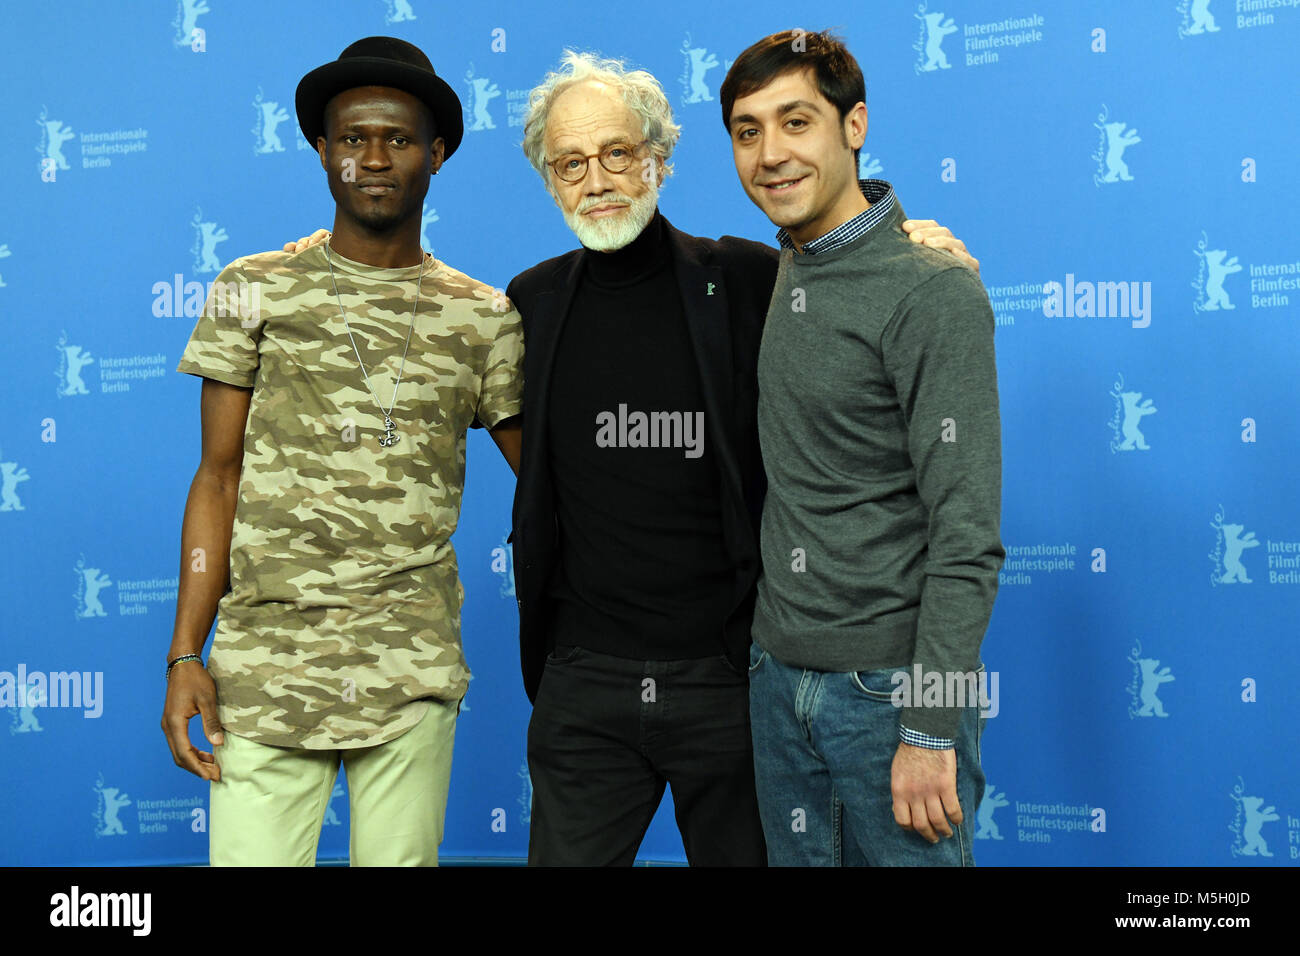 22 Febuary 2018, Germany, Berlin: Berlinale, photo session, 'Eldorado': Actor Akhet Téwendé (L-R), director Markus Imhoof, actor Raffaele Falcone. The film is running out of competition as part of the Berlinale. Credit: dpa picture alliance/Alamy Live News Stock Photo